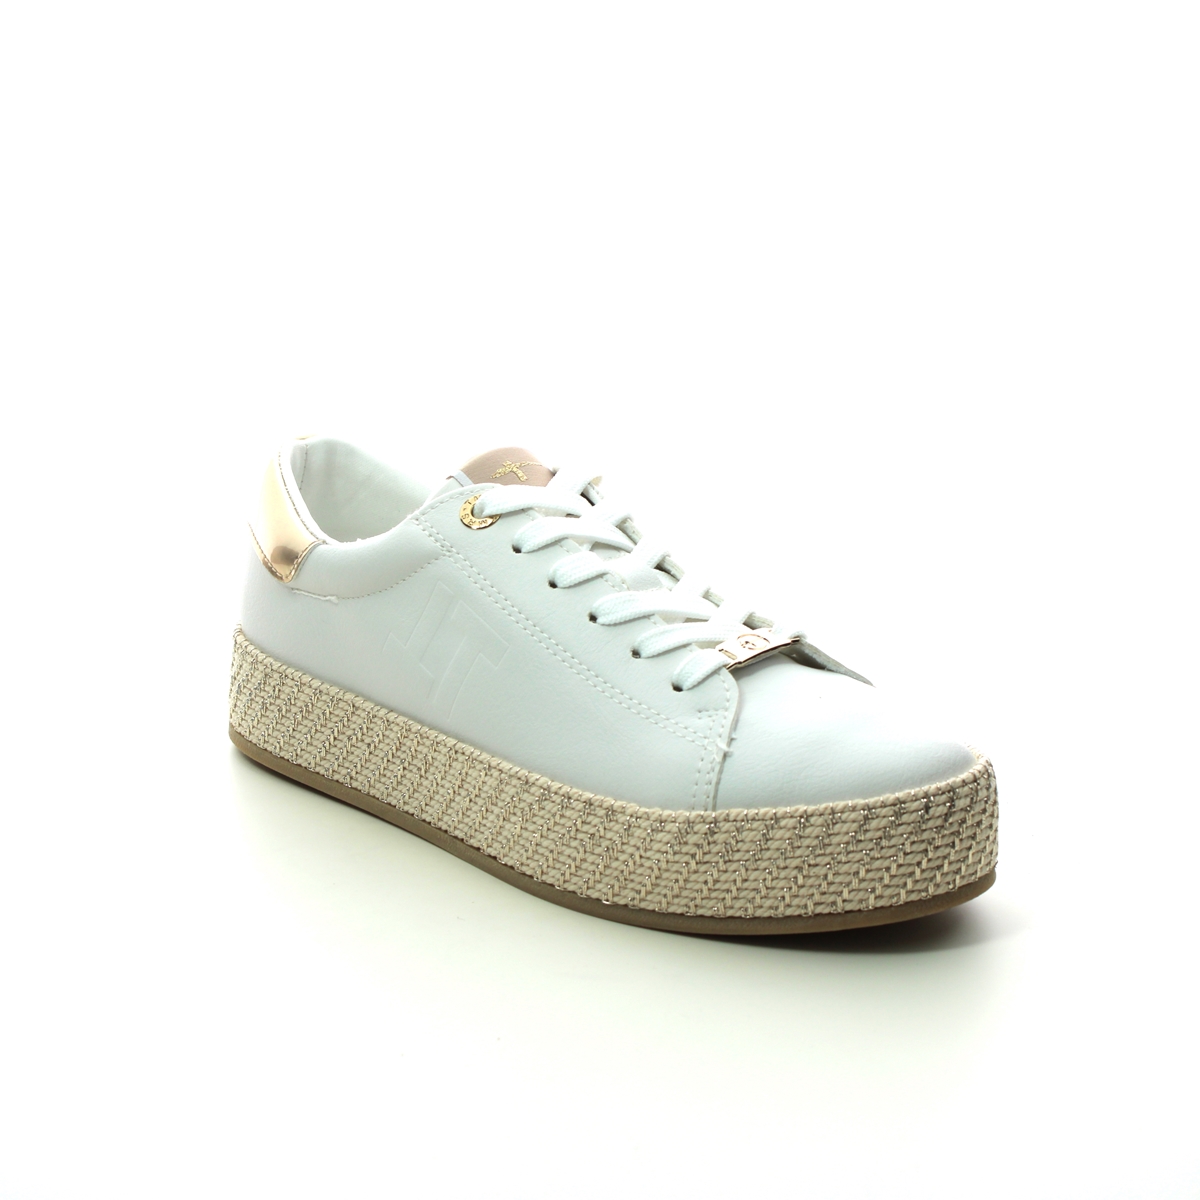 Tamaris Espadrille White Gold Womens Trainers 23713-20-190 In Size 40 In Plain White Gold